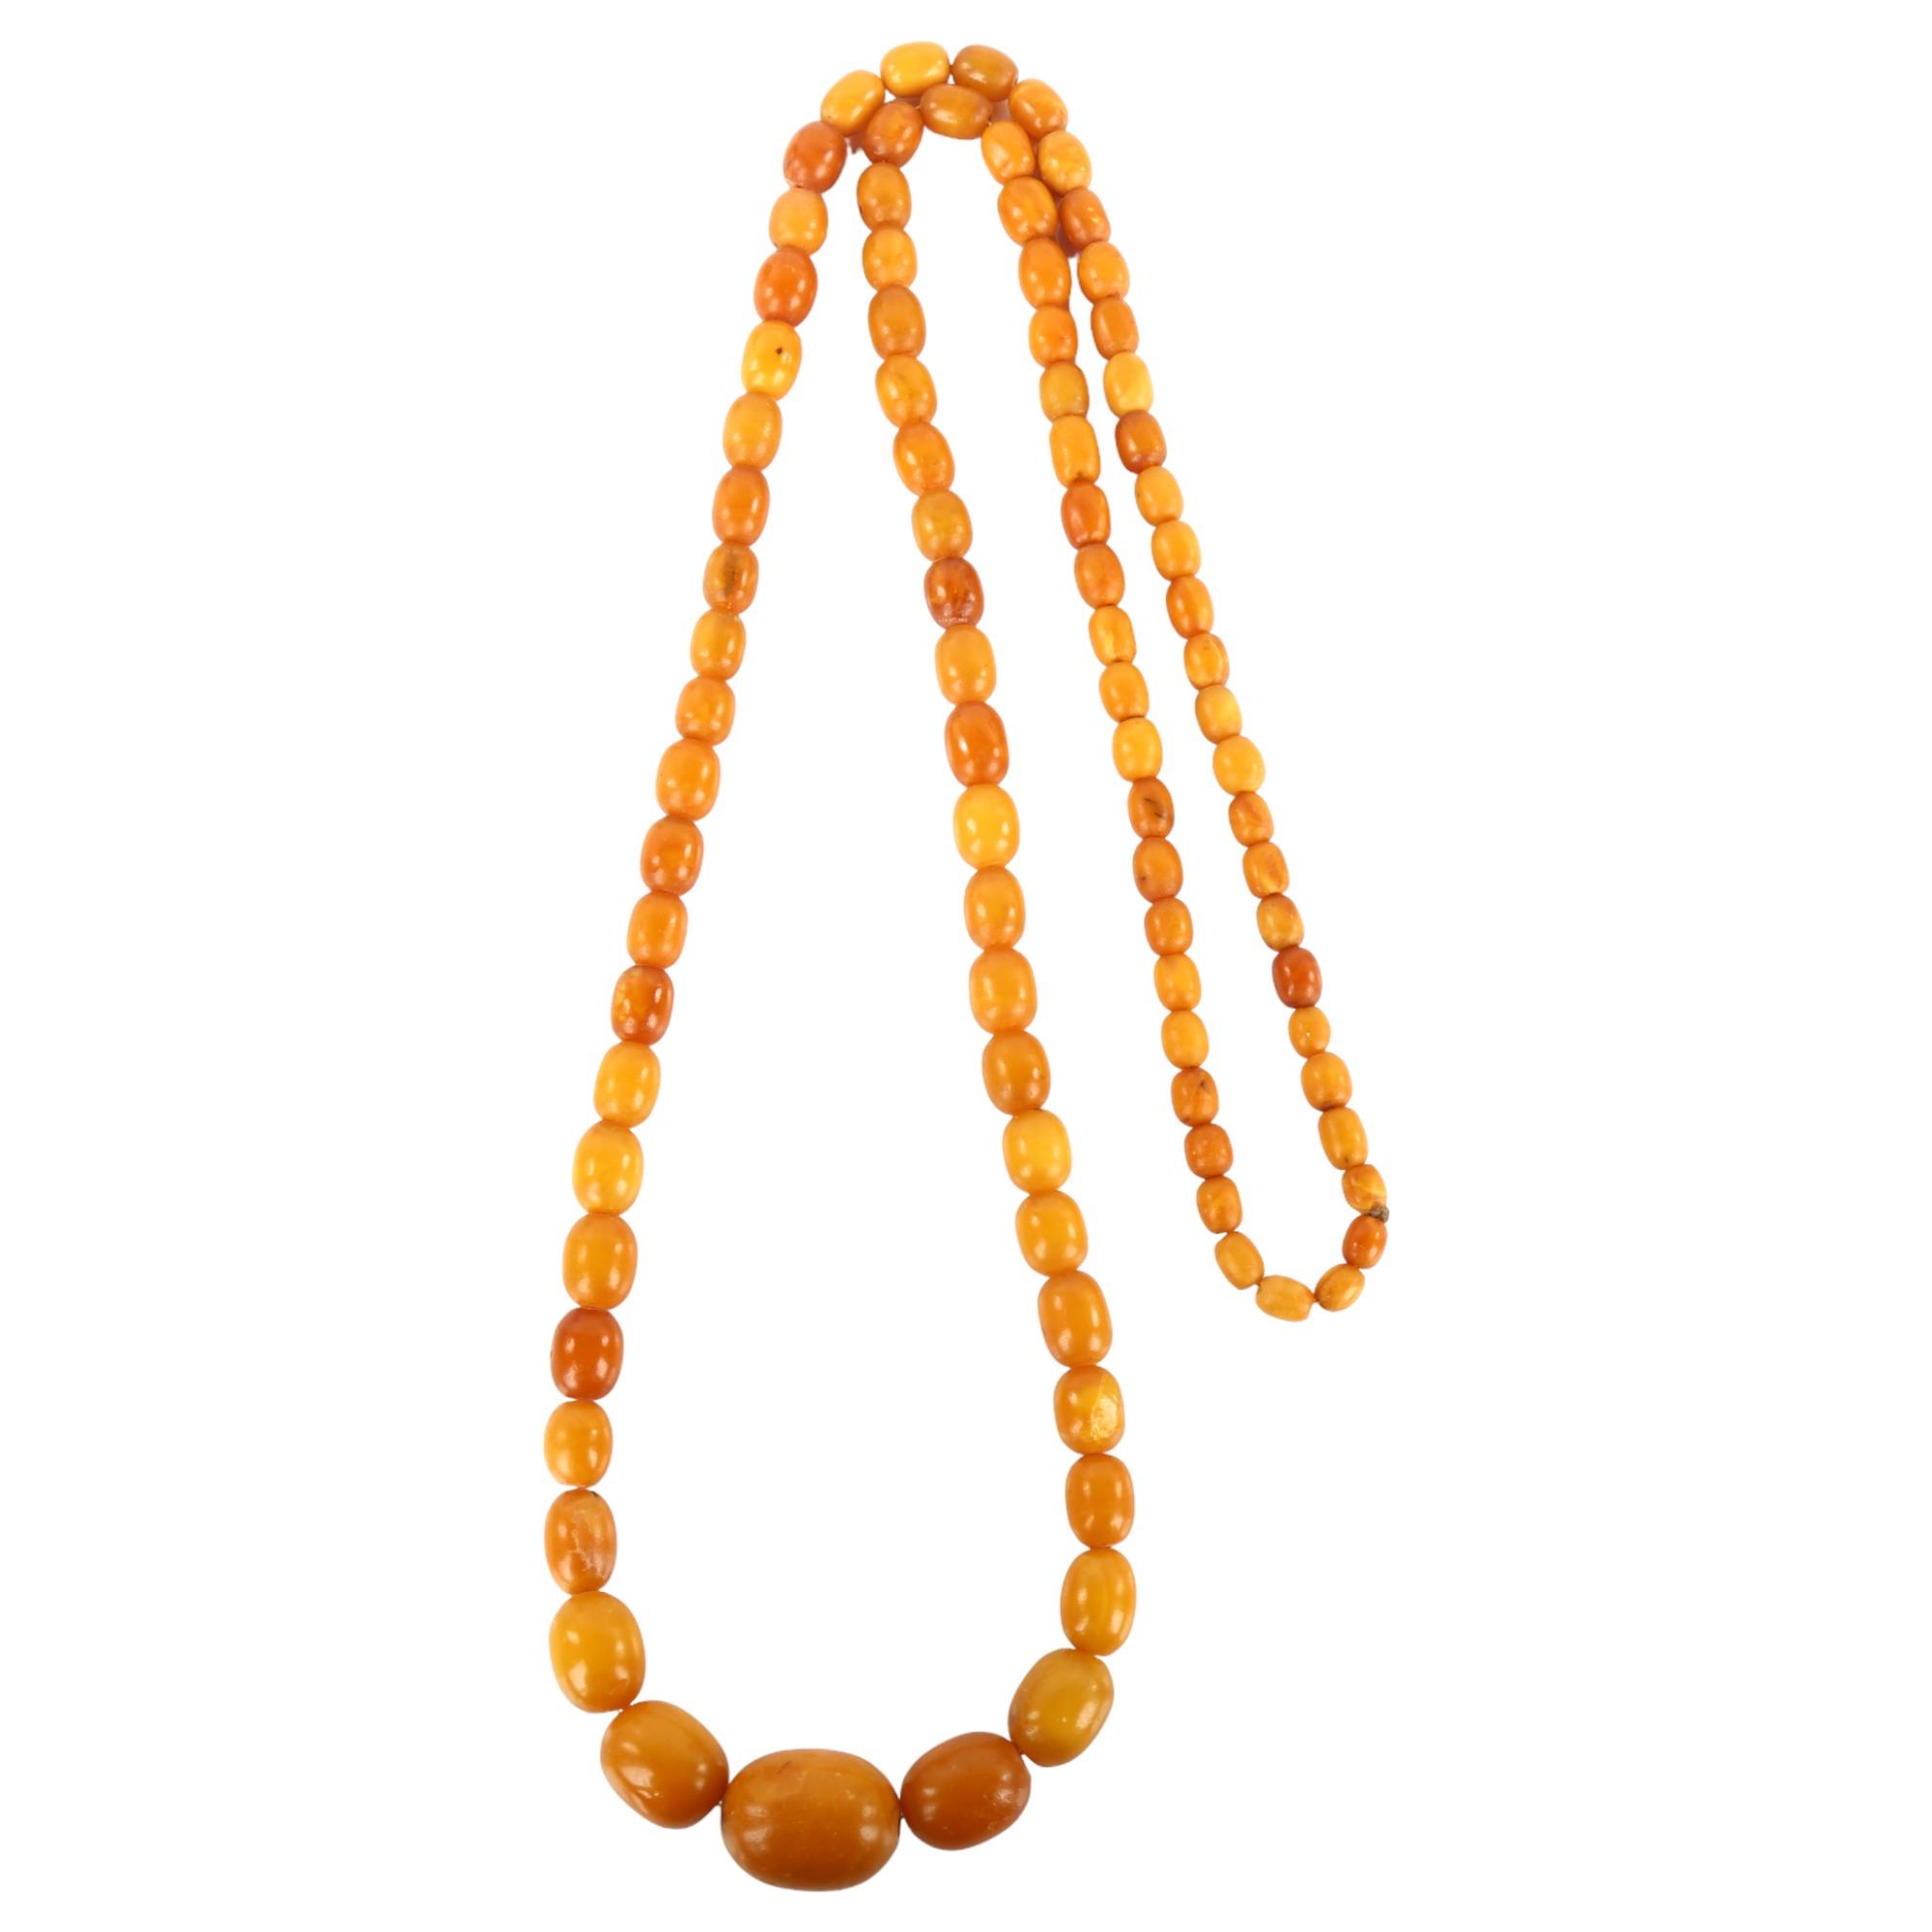 A graduated single-strand butterscotch amber bead necklace, bead lengths 22.1-7.0mm, necklace length